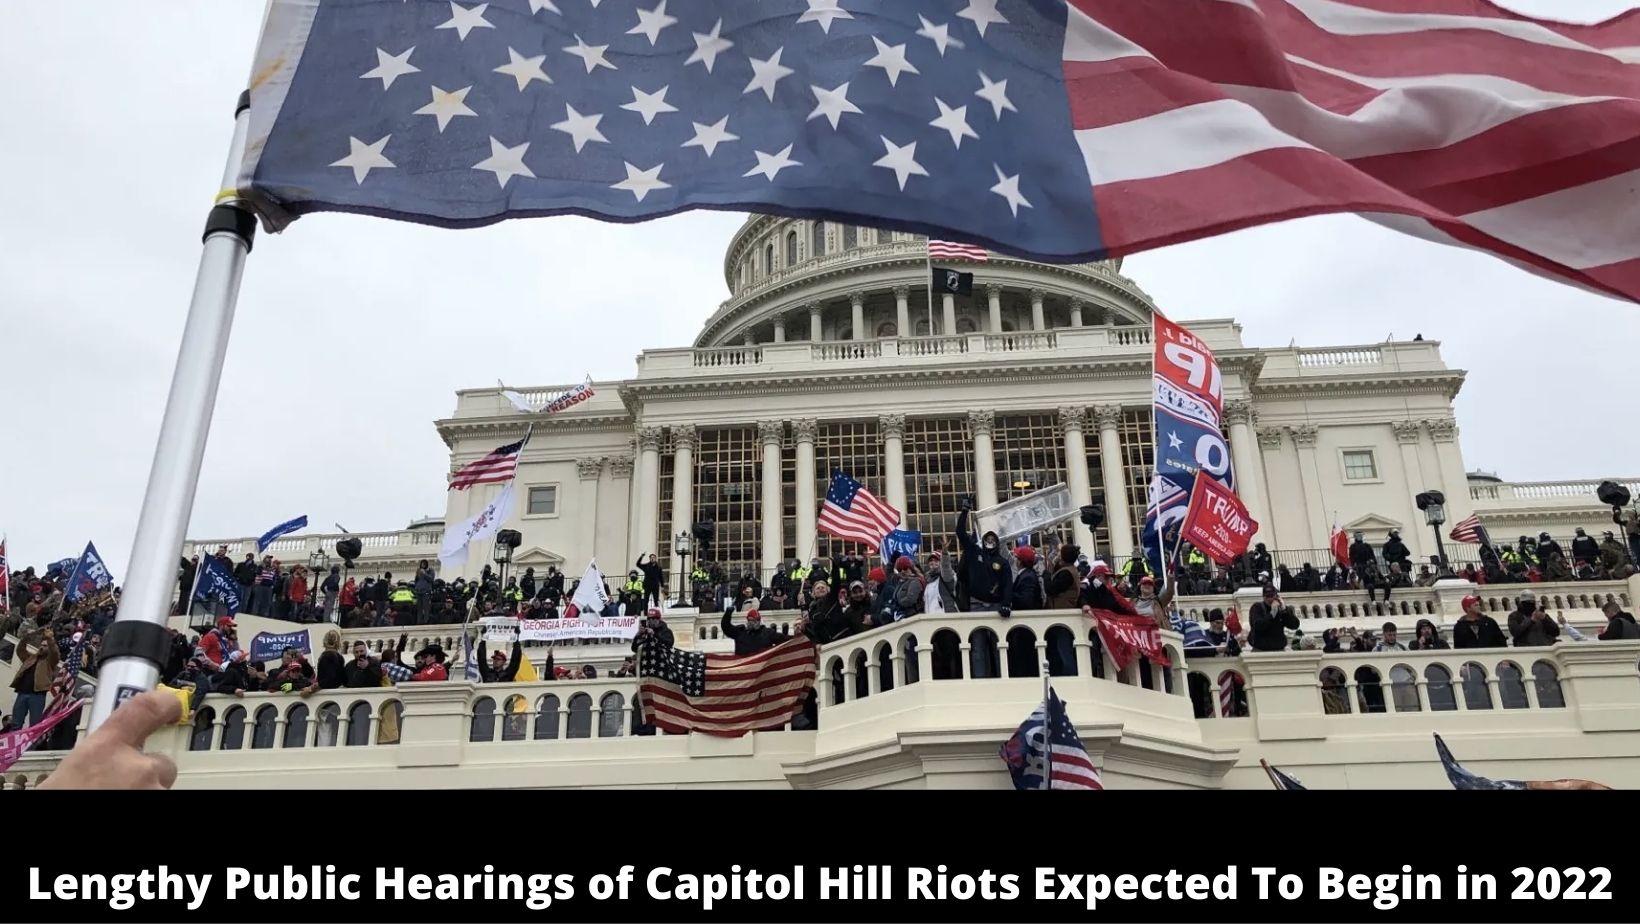 Lengthy Public Hearings of Capitol Hill Riots Expected To Begin in 2022